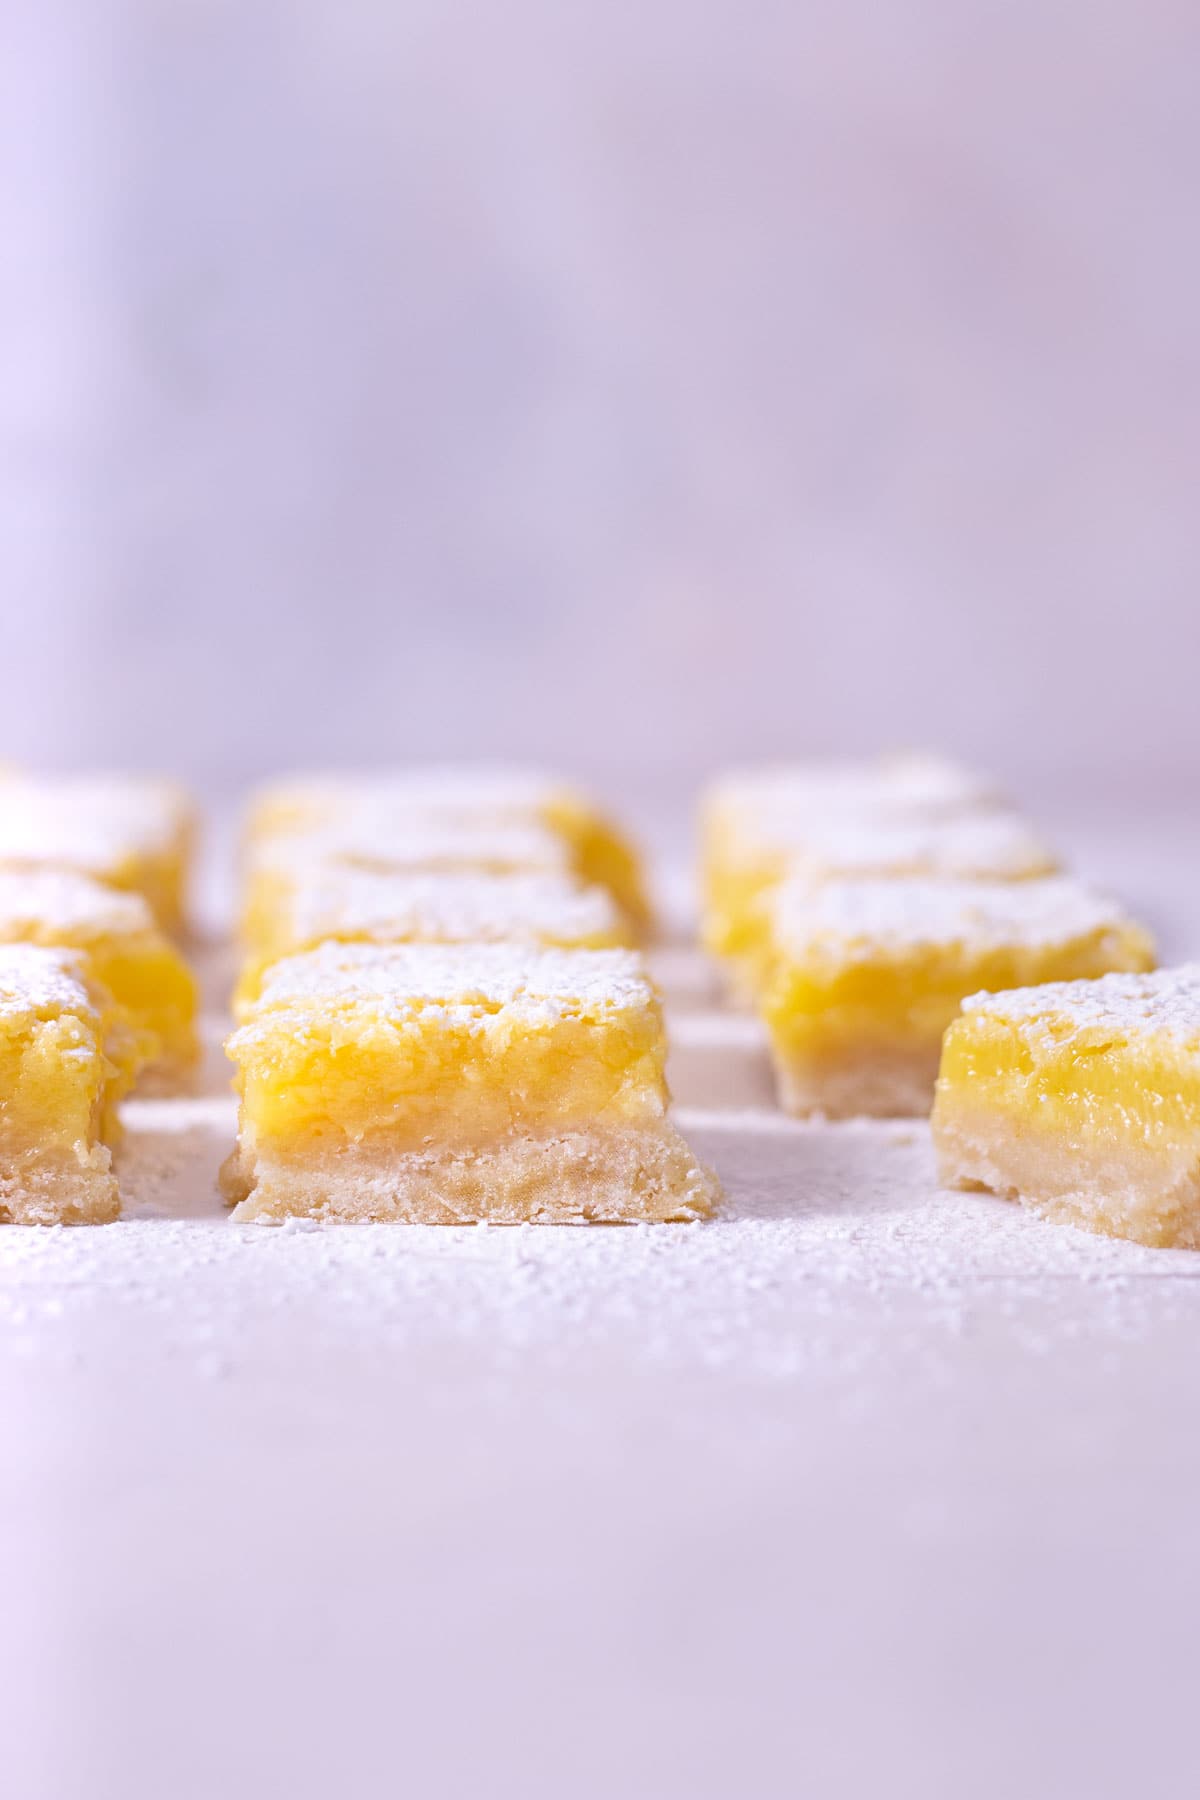 Straight on view of Lemon Bars lined up in a grid with a light blue background.